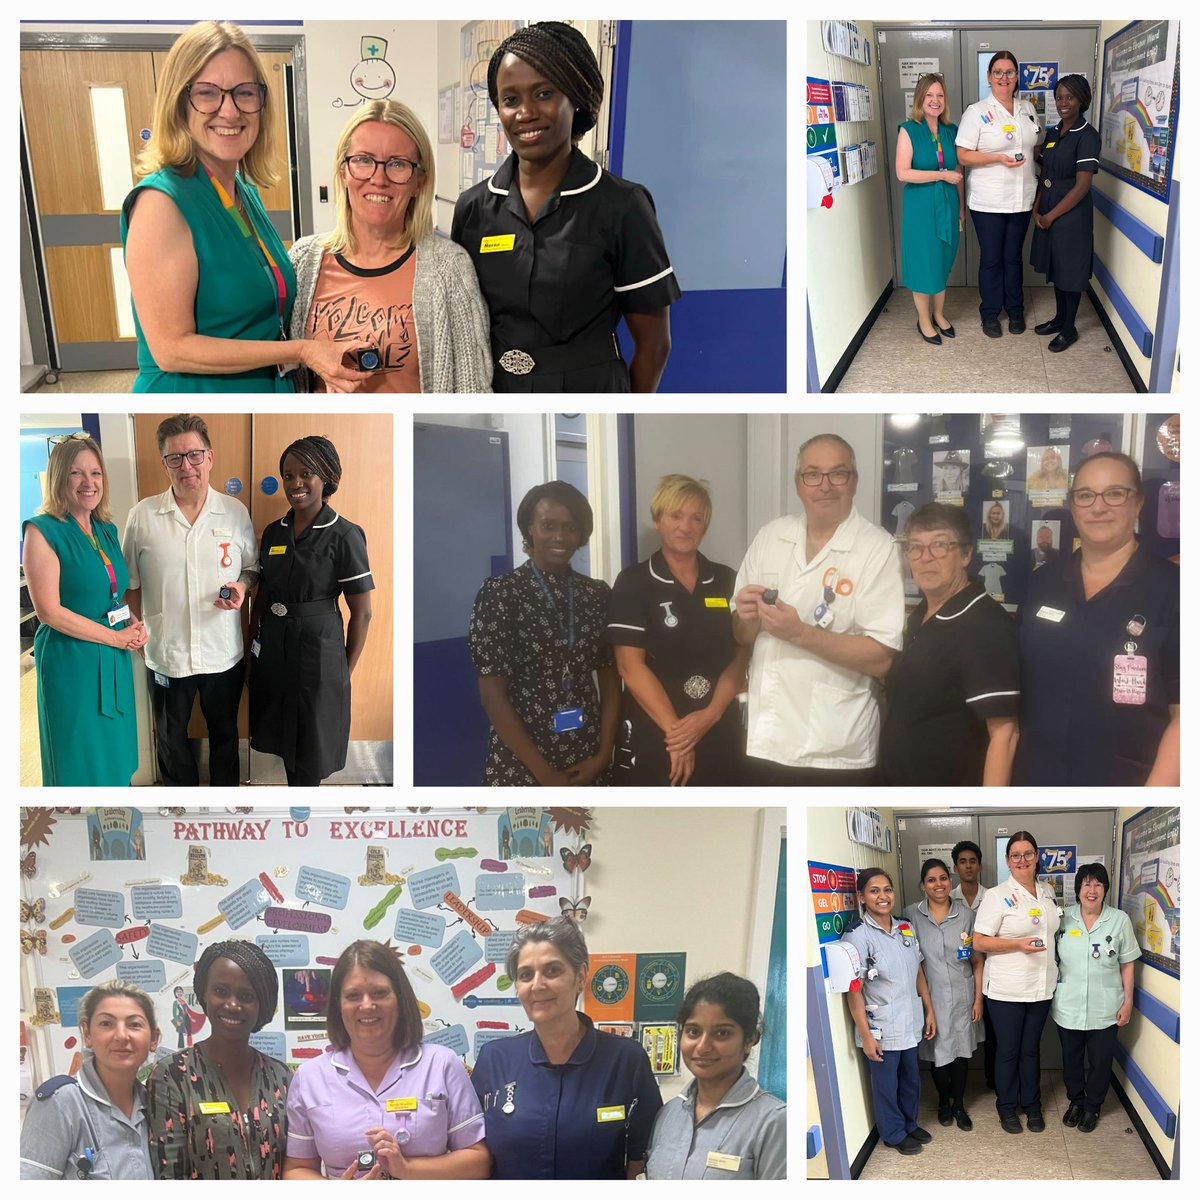 Congratulations to our 5 healthcare support workers @nghnhstrust on being recognised by @cnoengland for their contributions to our organisation. Proud to present your awards alongside @higginsyvonne this week.